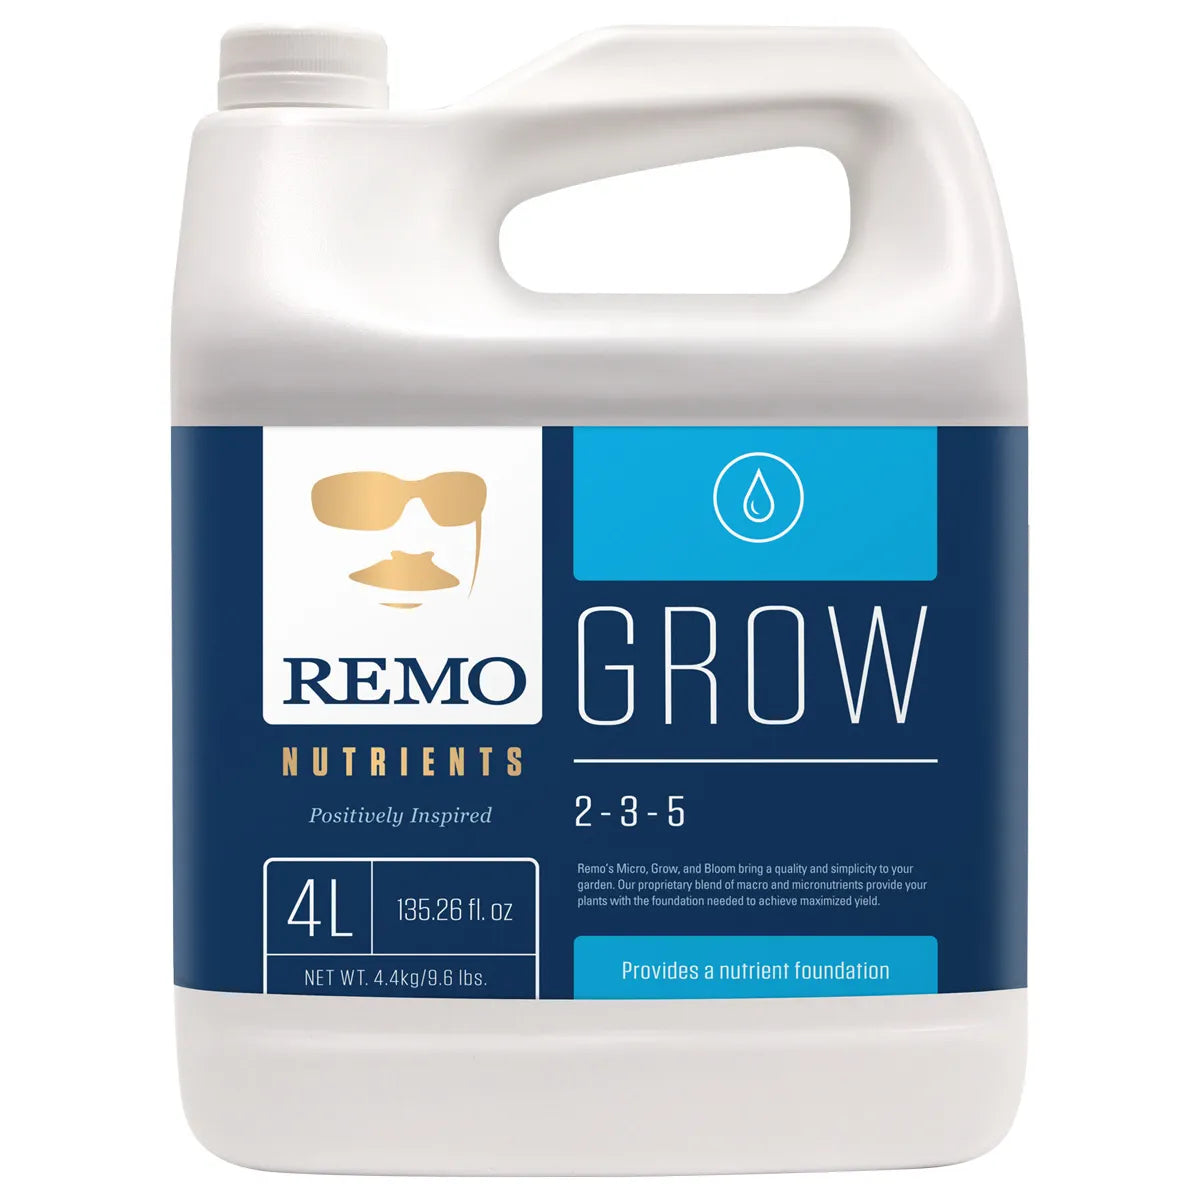 Remo's Nutrients - Grow Nutrient